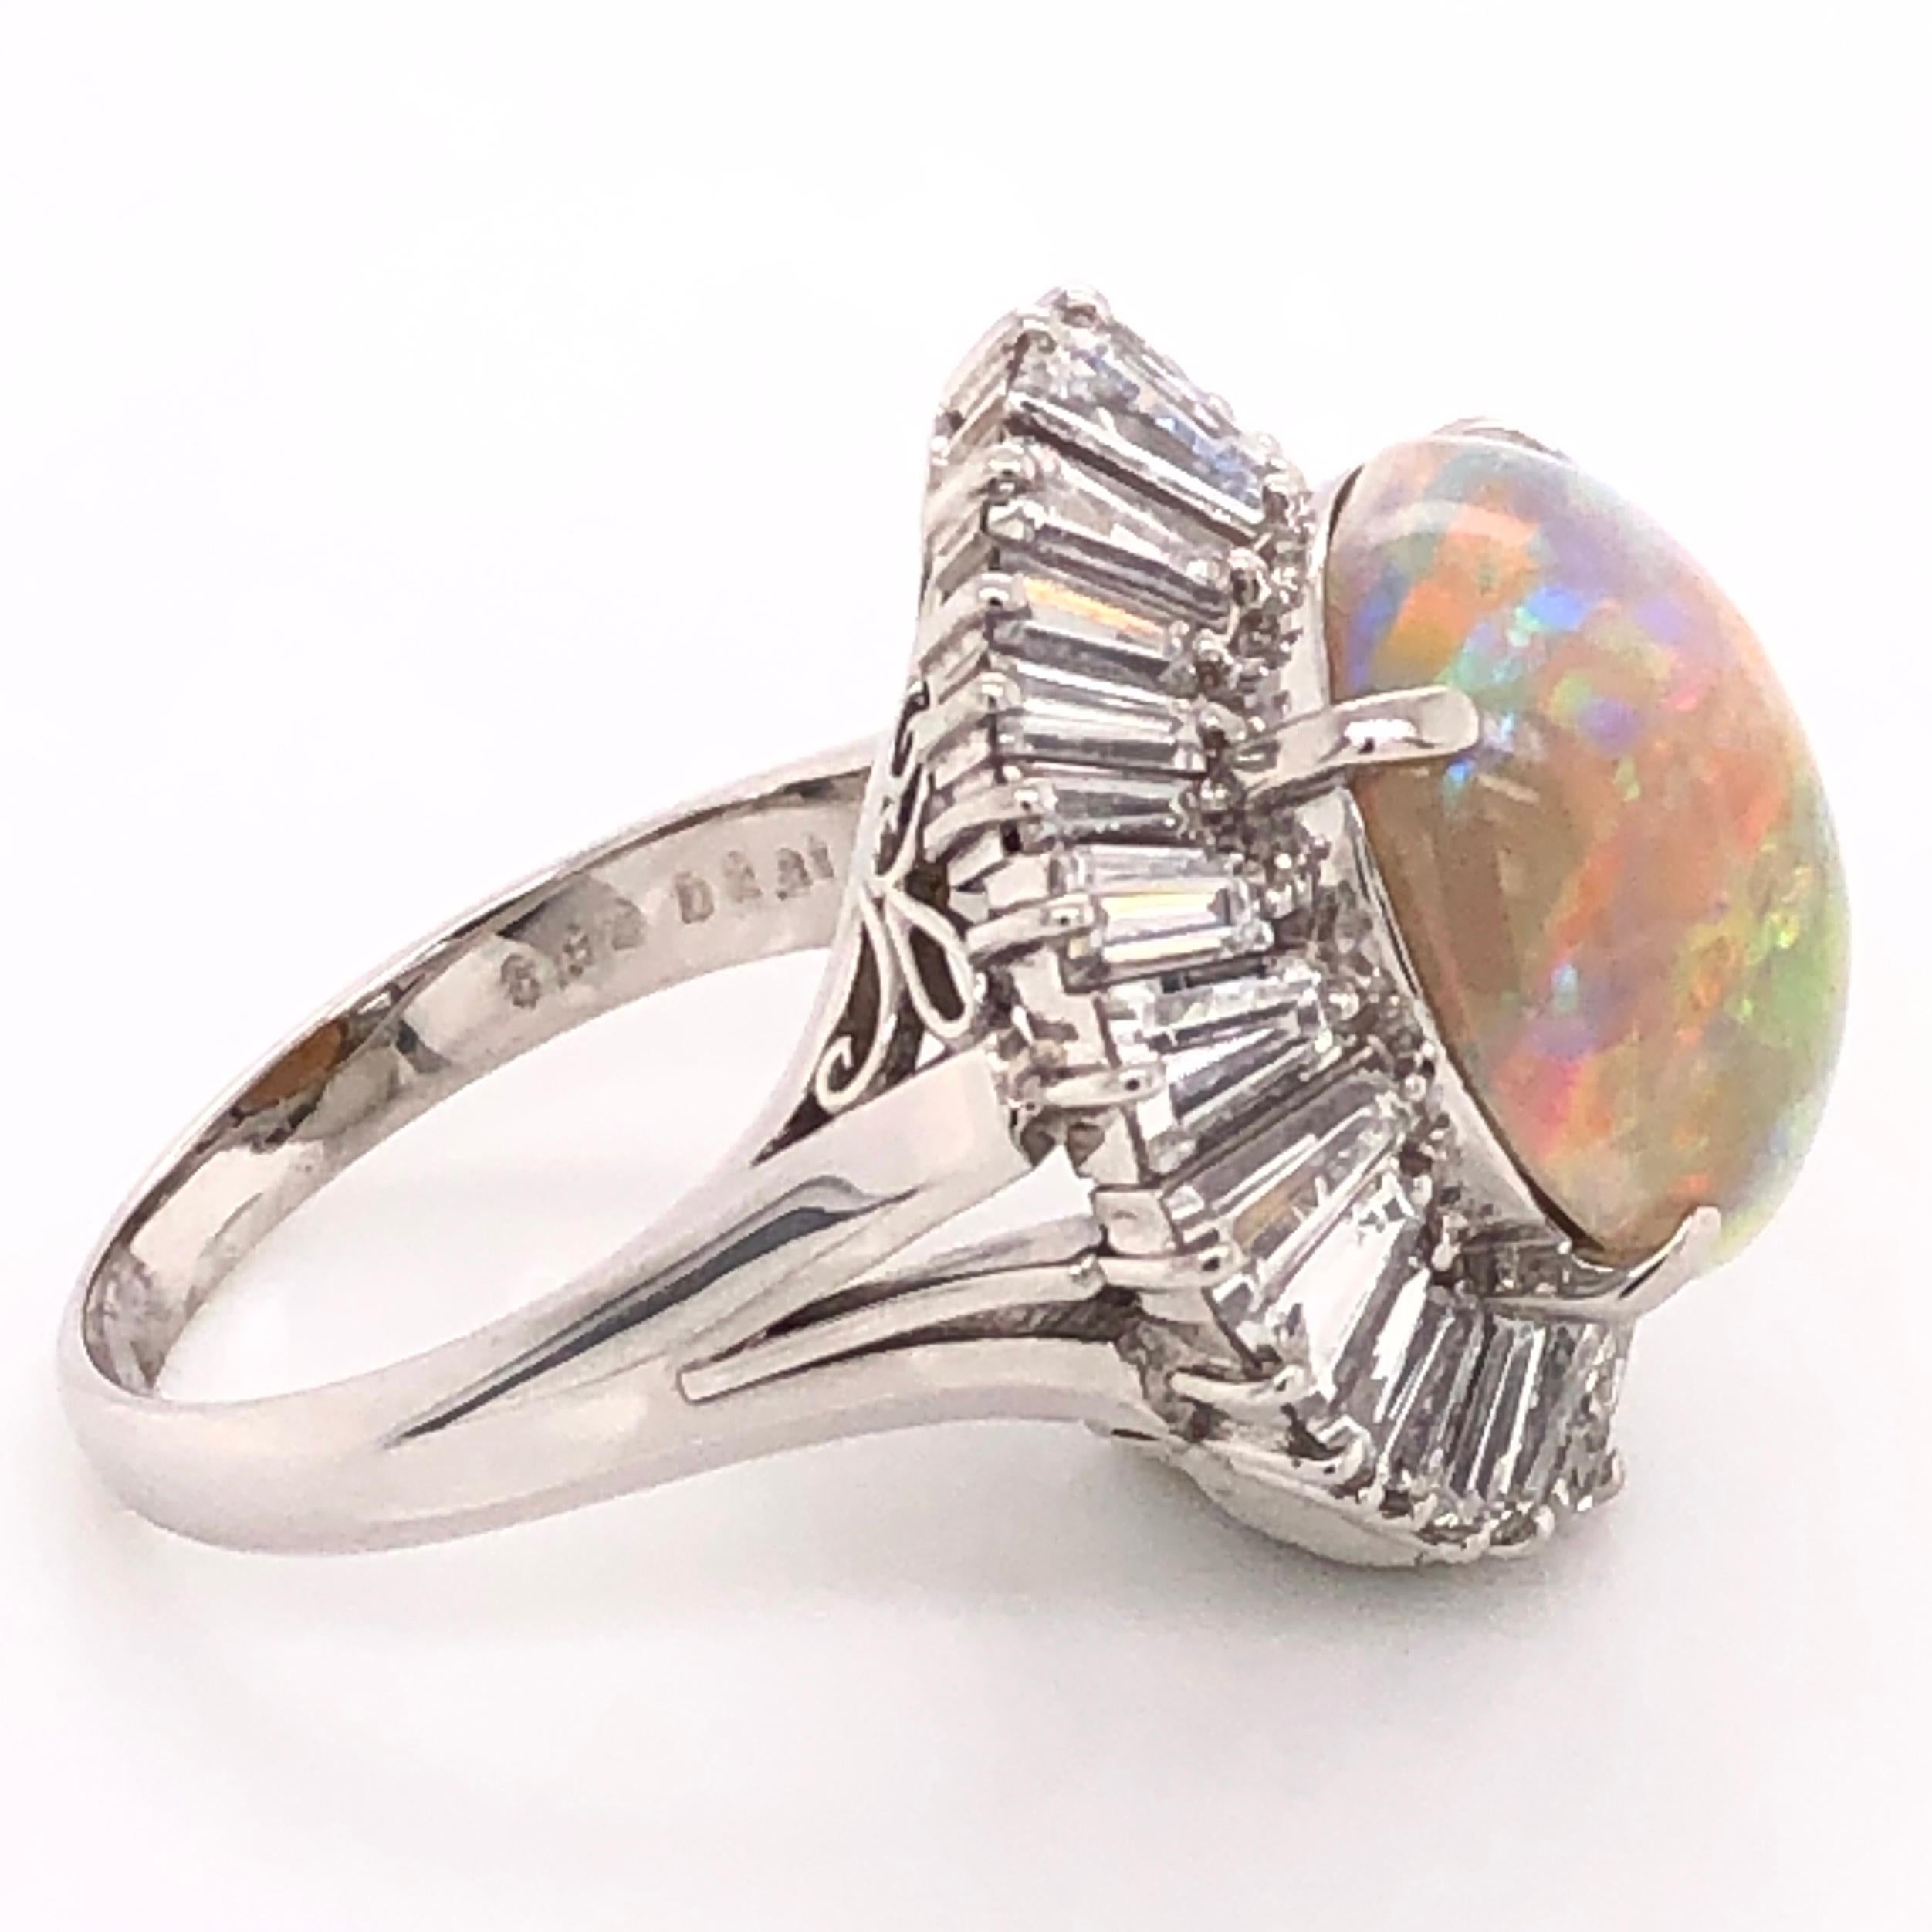 5.82 Carat Opal Diamond Platinum Vintage Cocktail Ring Fine Estate Jewelry In Excellent Condition For Sale In Montreal, QC